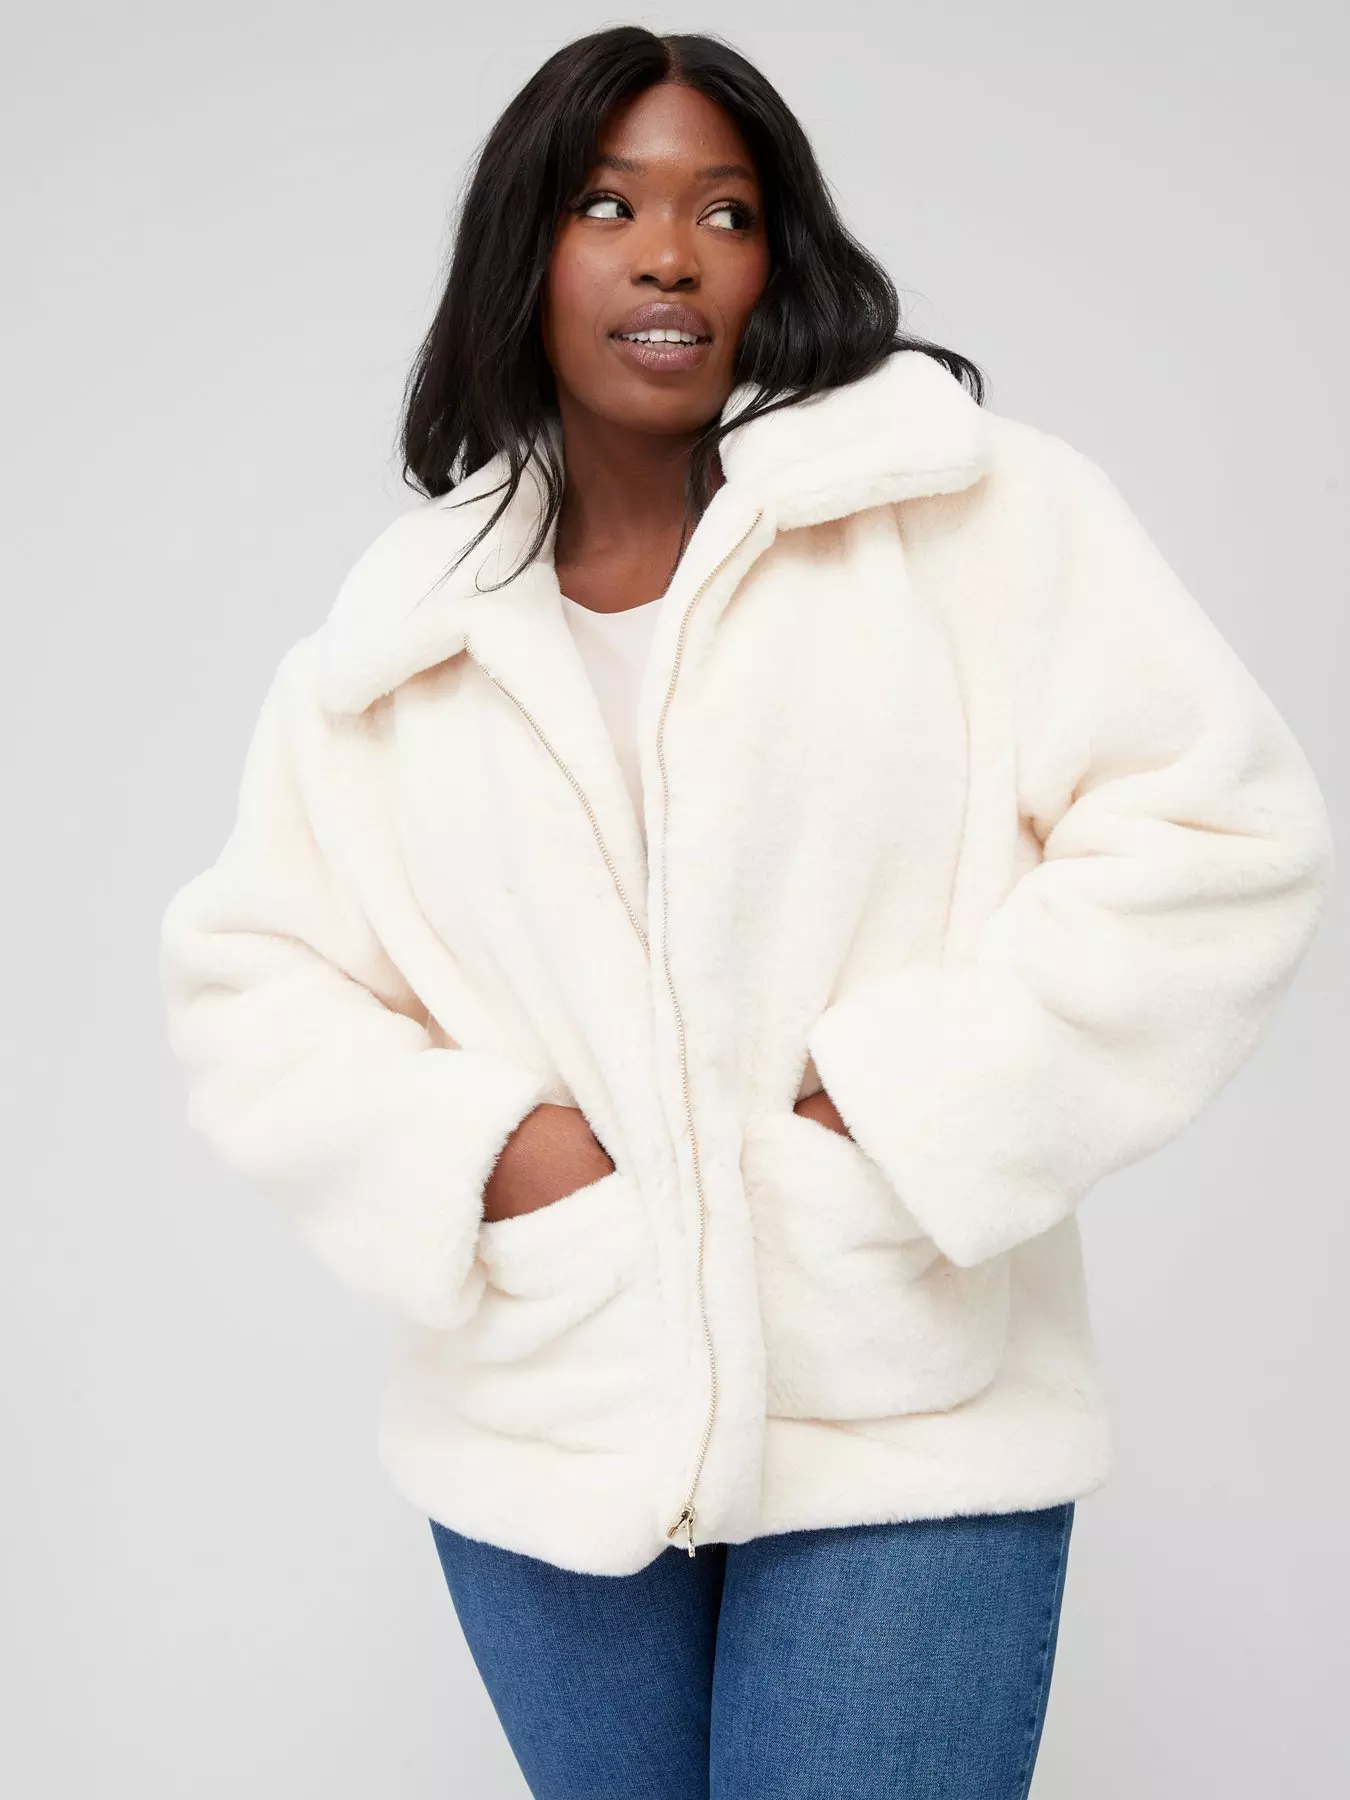 Womens Coat Clearance Fluffy Sherpa Sale Ladies Teen Girls Clothes